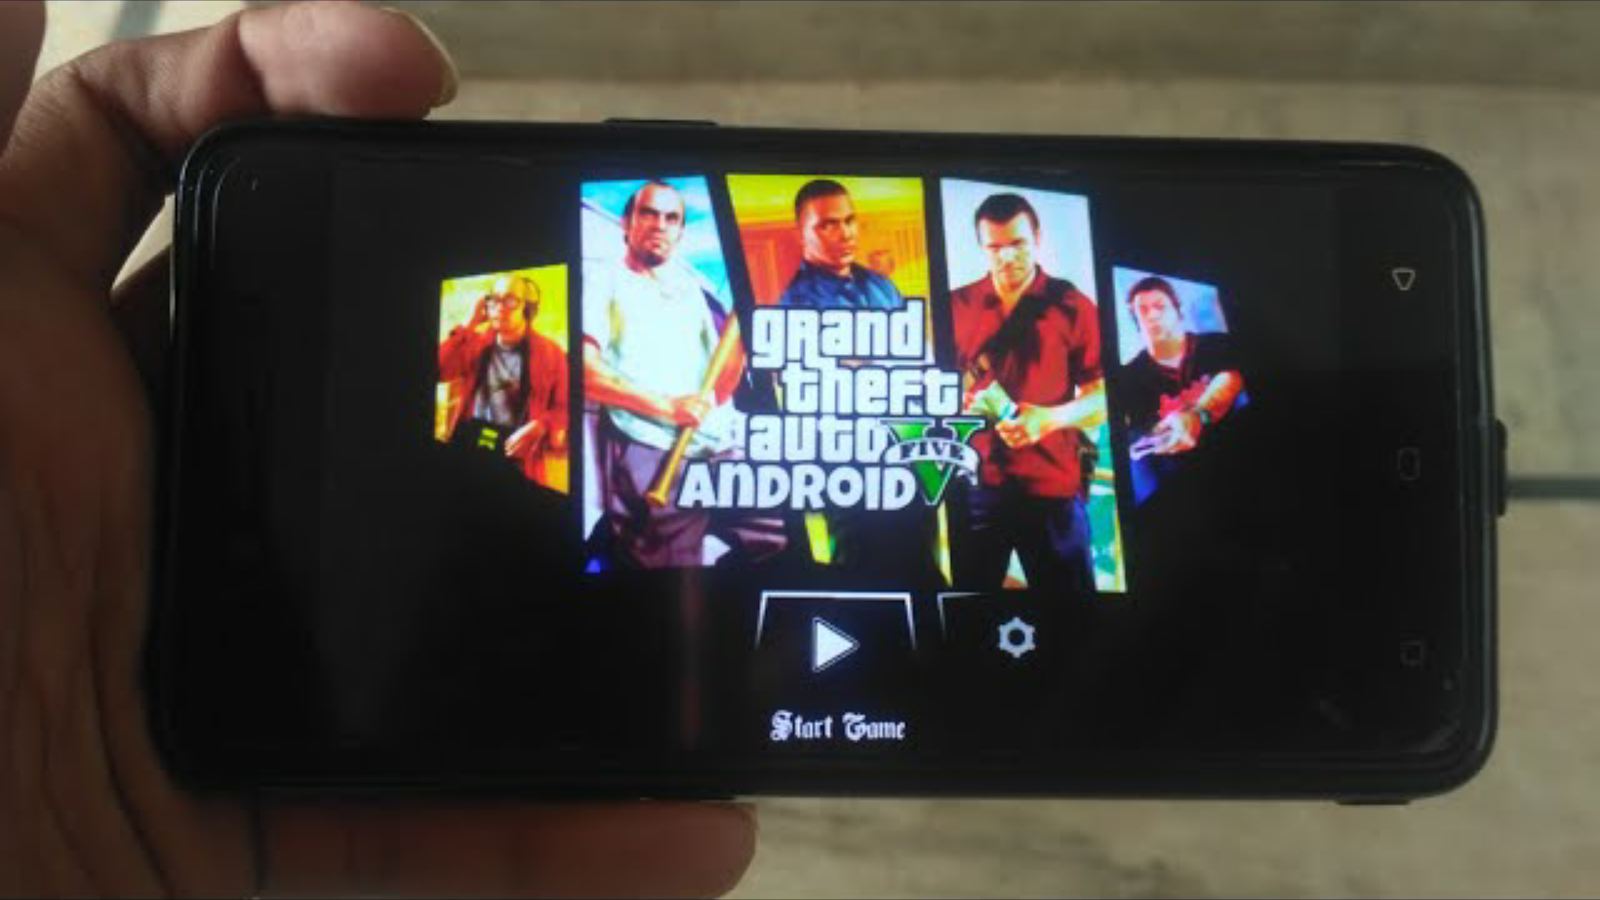 mobile app gta 5 download for android